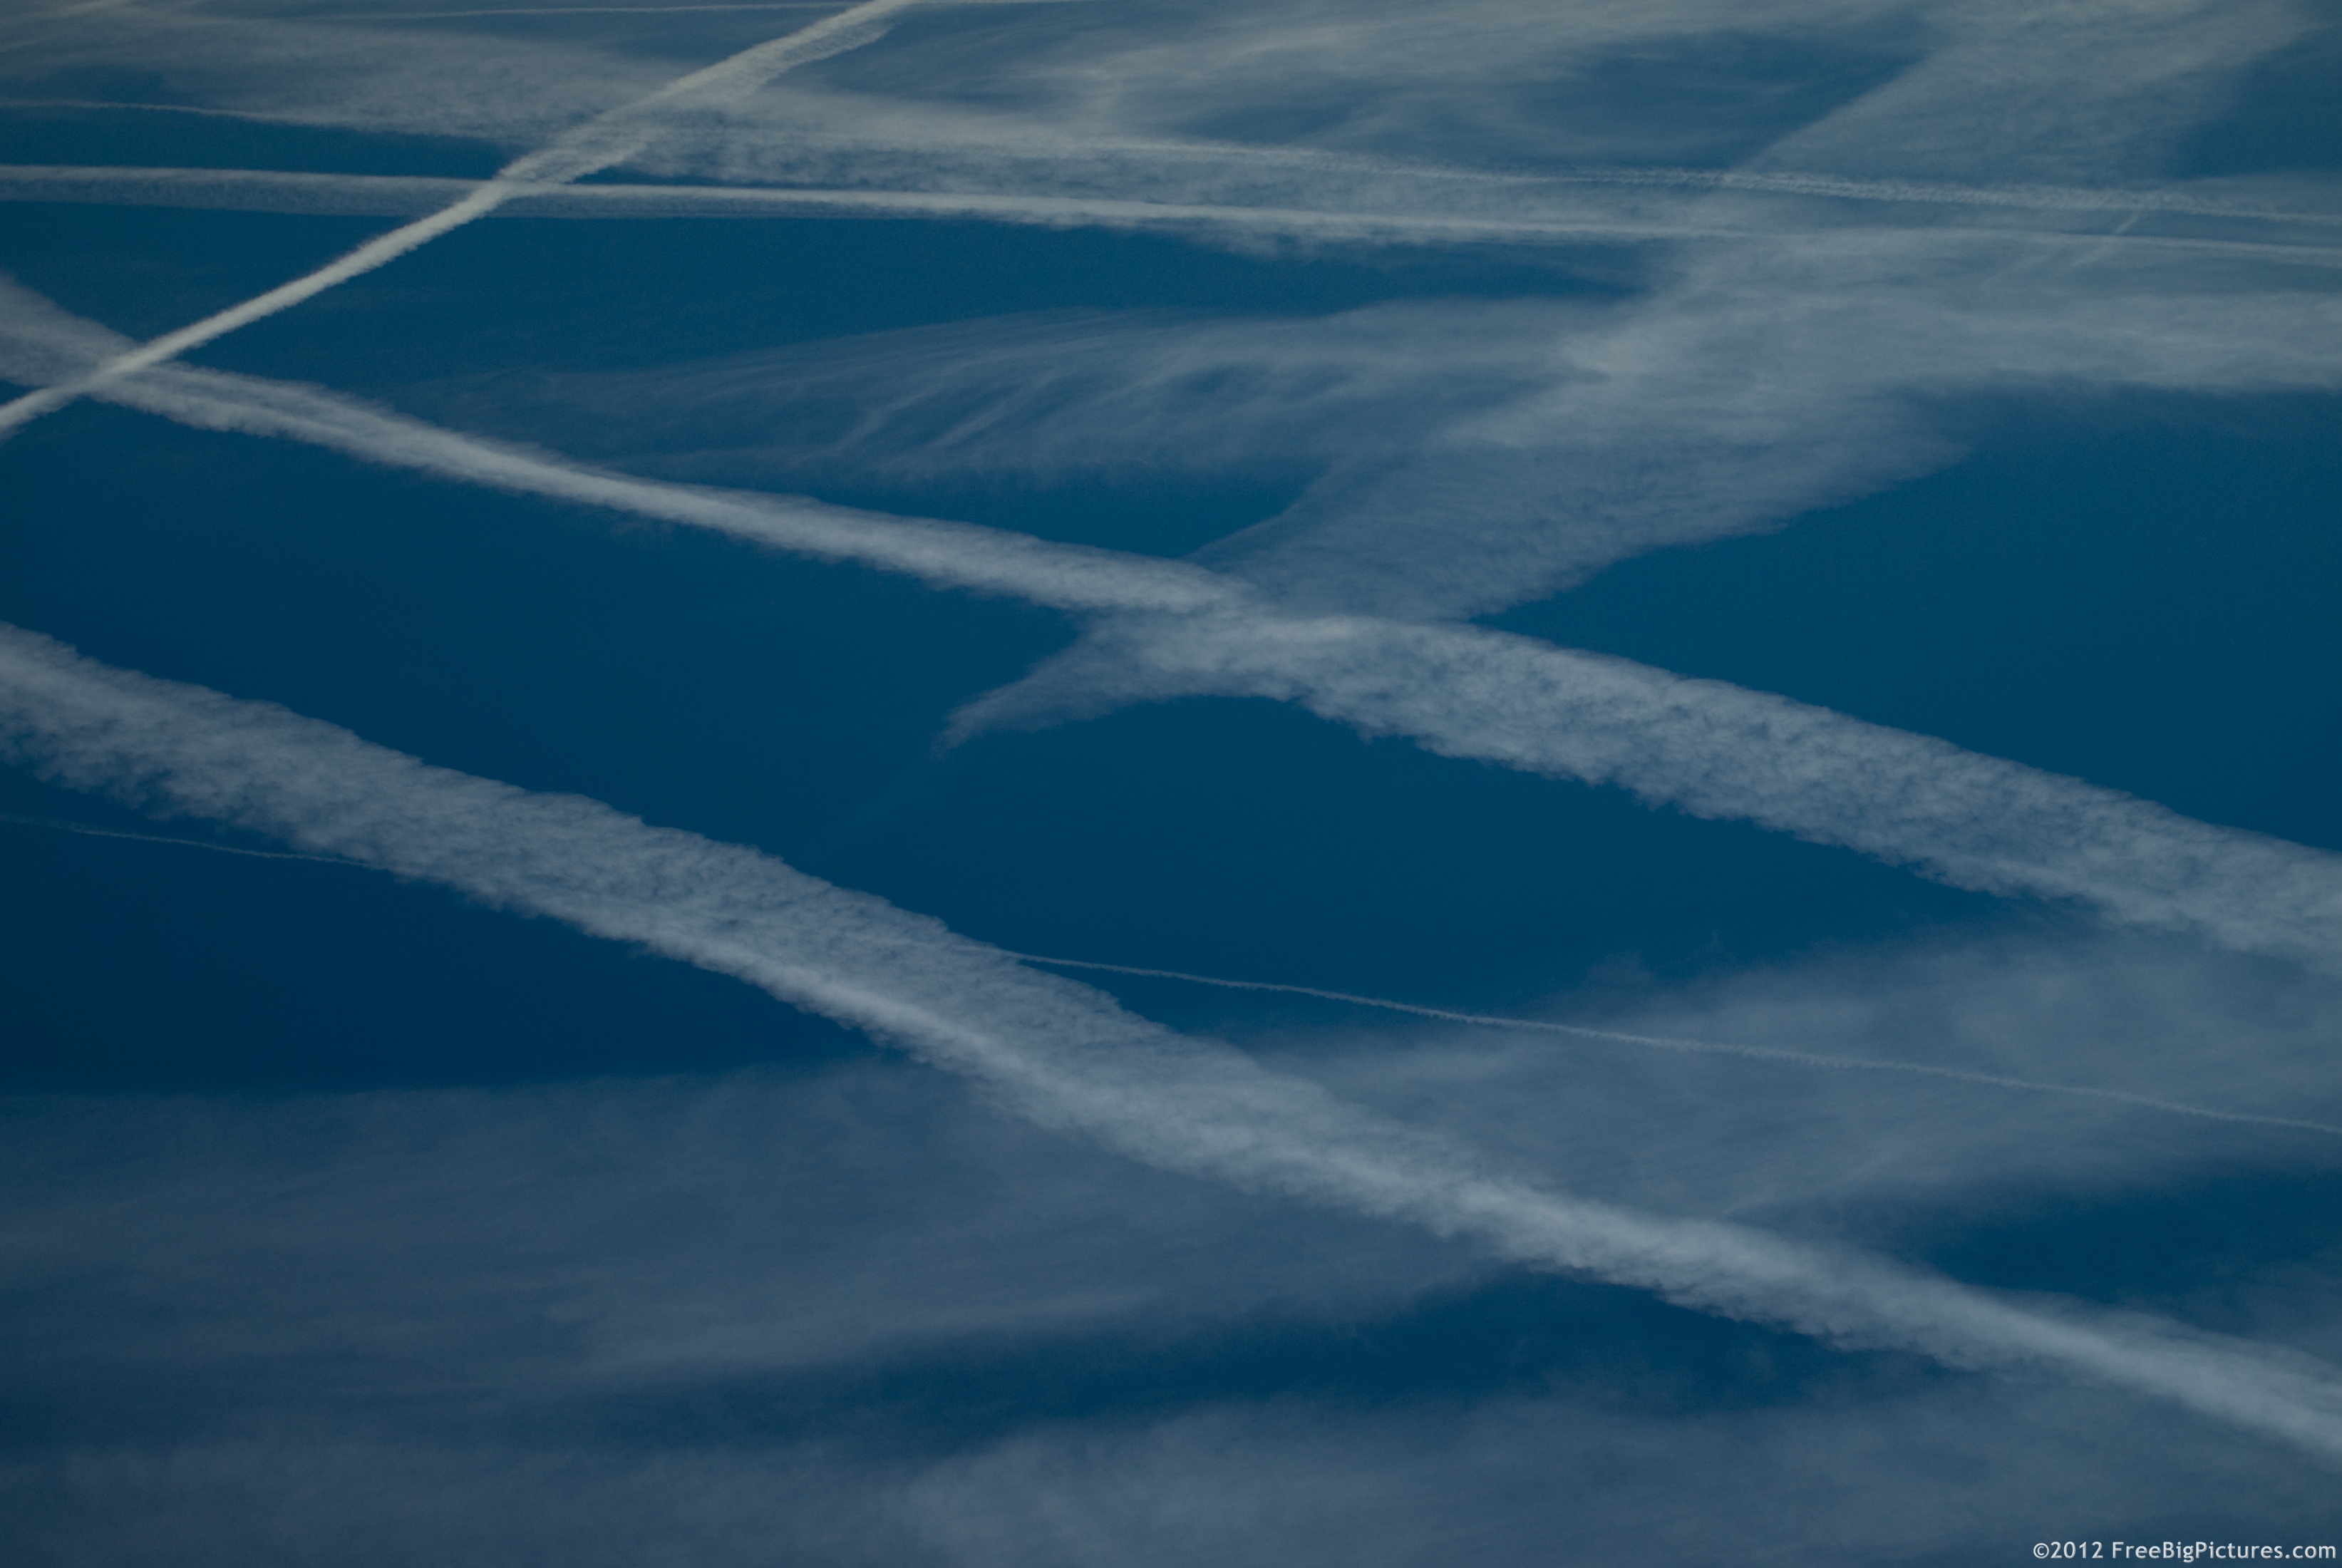 Lots of white traces on a blue sky left by the airplane engines composed mainly of carbon dioxide and water vapor. Maybe could be chemtrails according to the conspiracy theory followers.